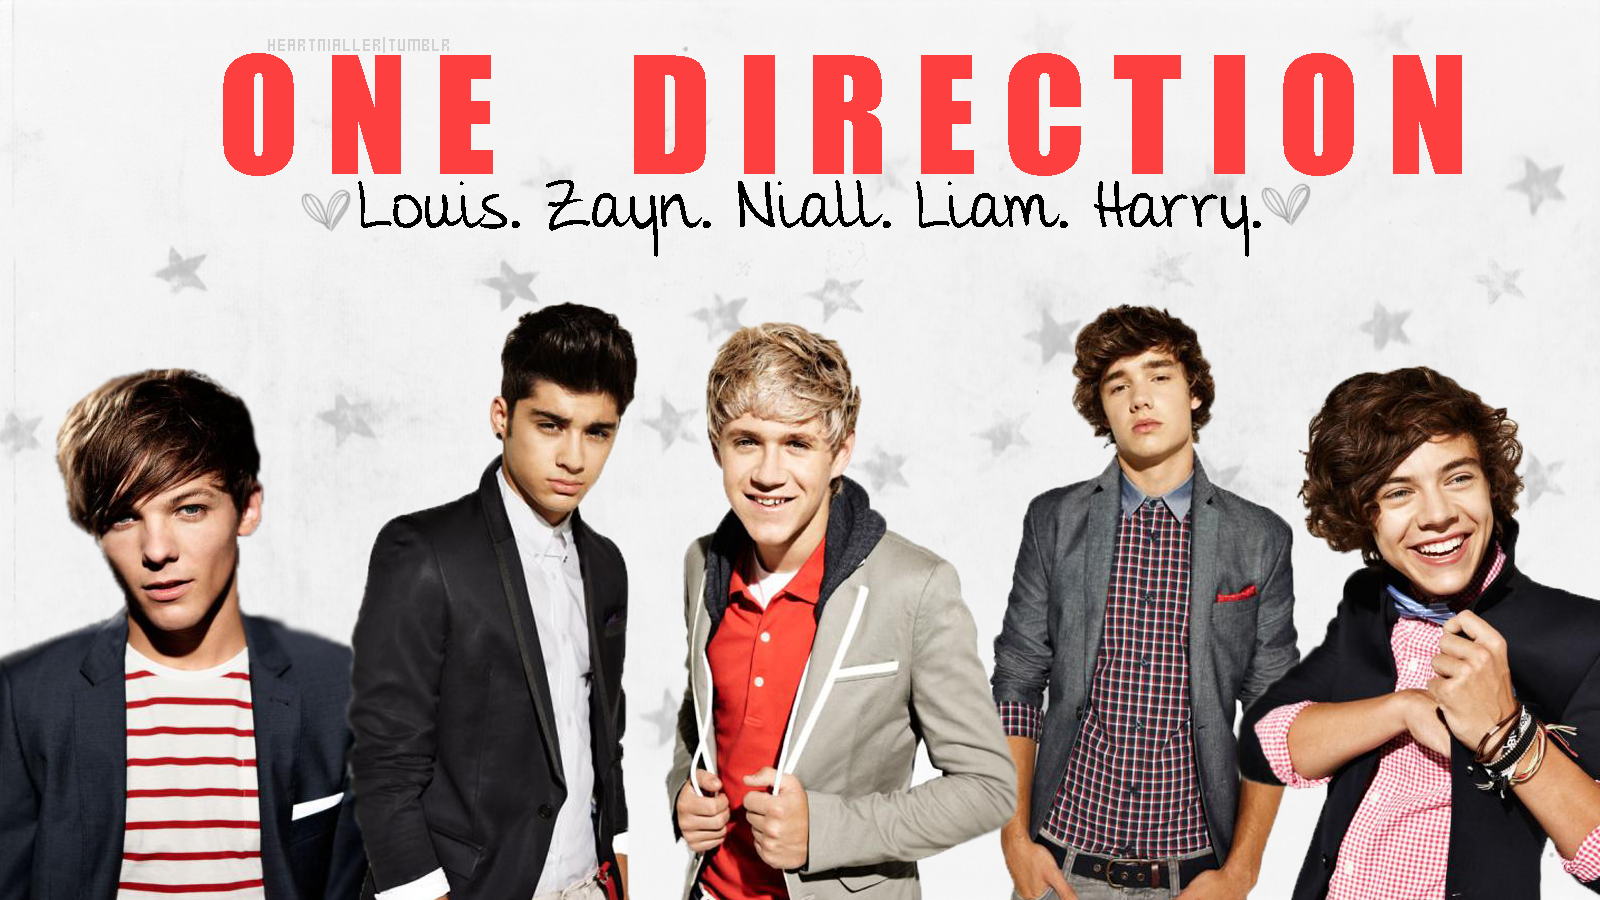 One Direction HD Wallpapers 2013 for Desktop and Iphone